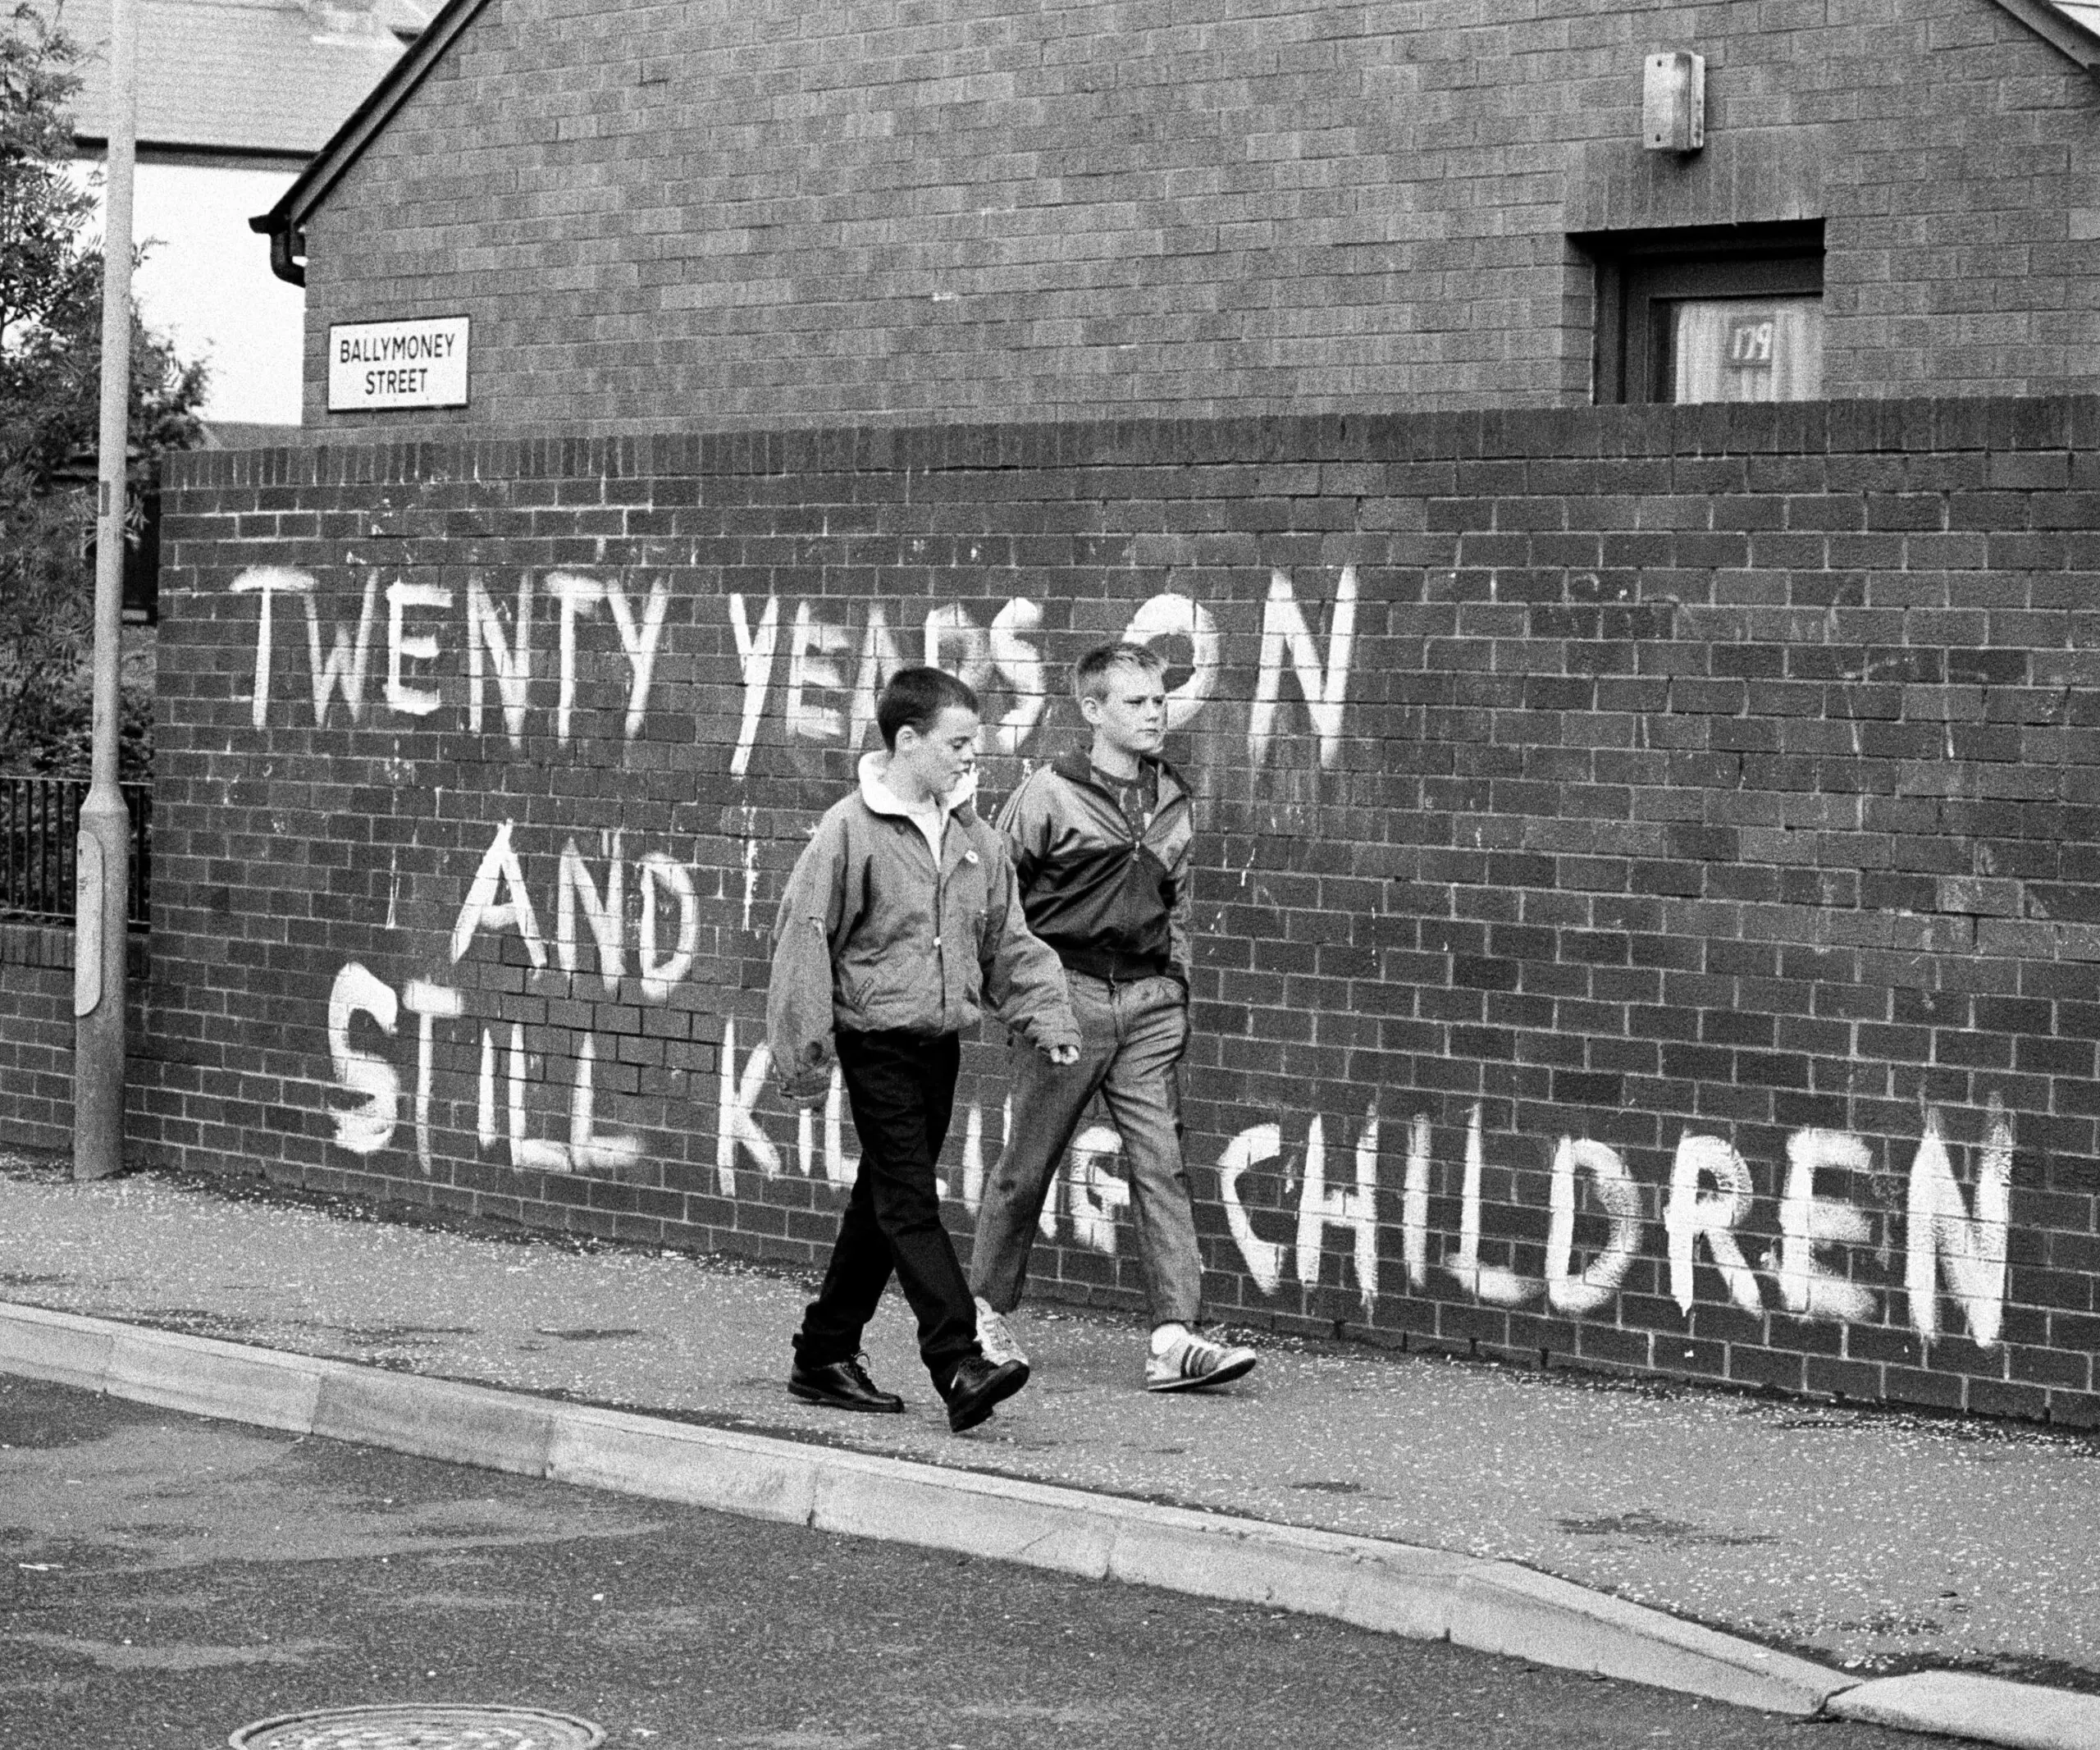 Two boys walk past the wall with the painted slogan "Twenty years on and still killing our children" on Ballymoney Street in Belfast in 1989.